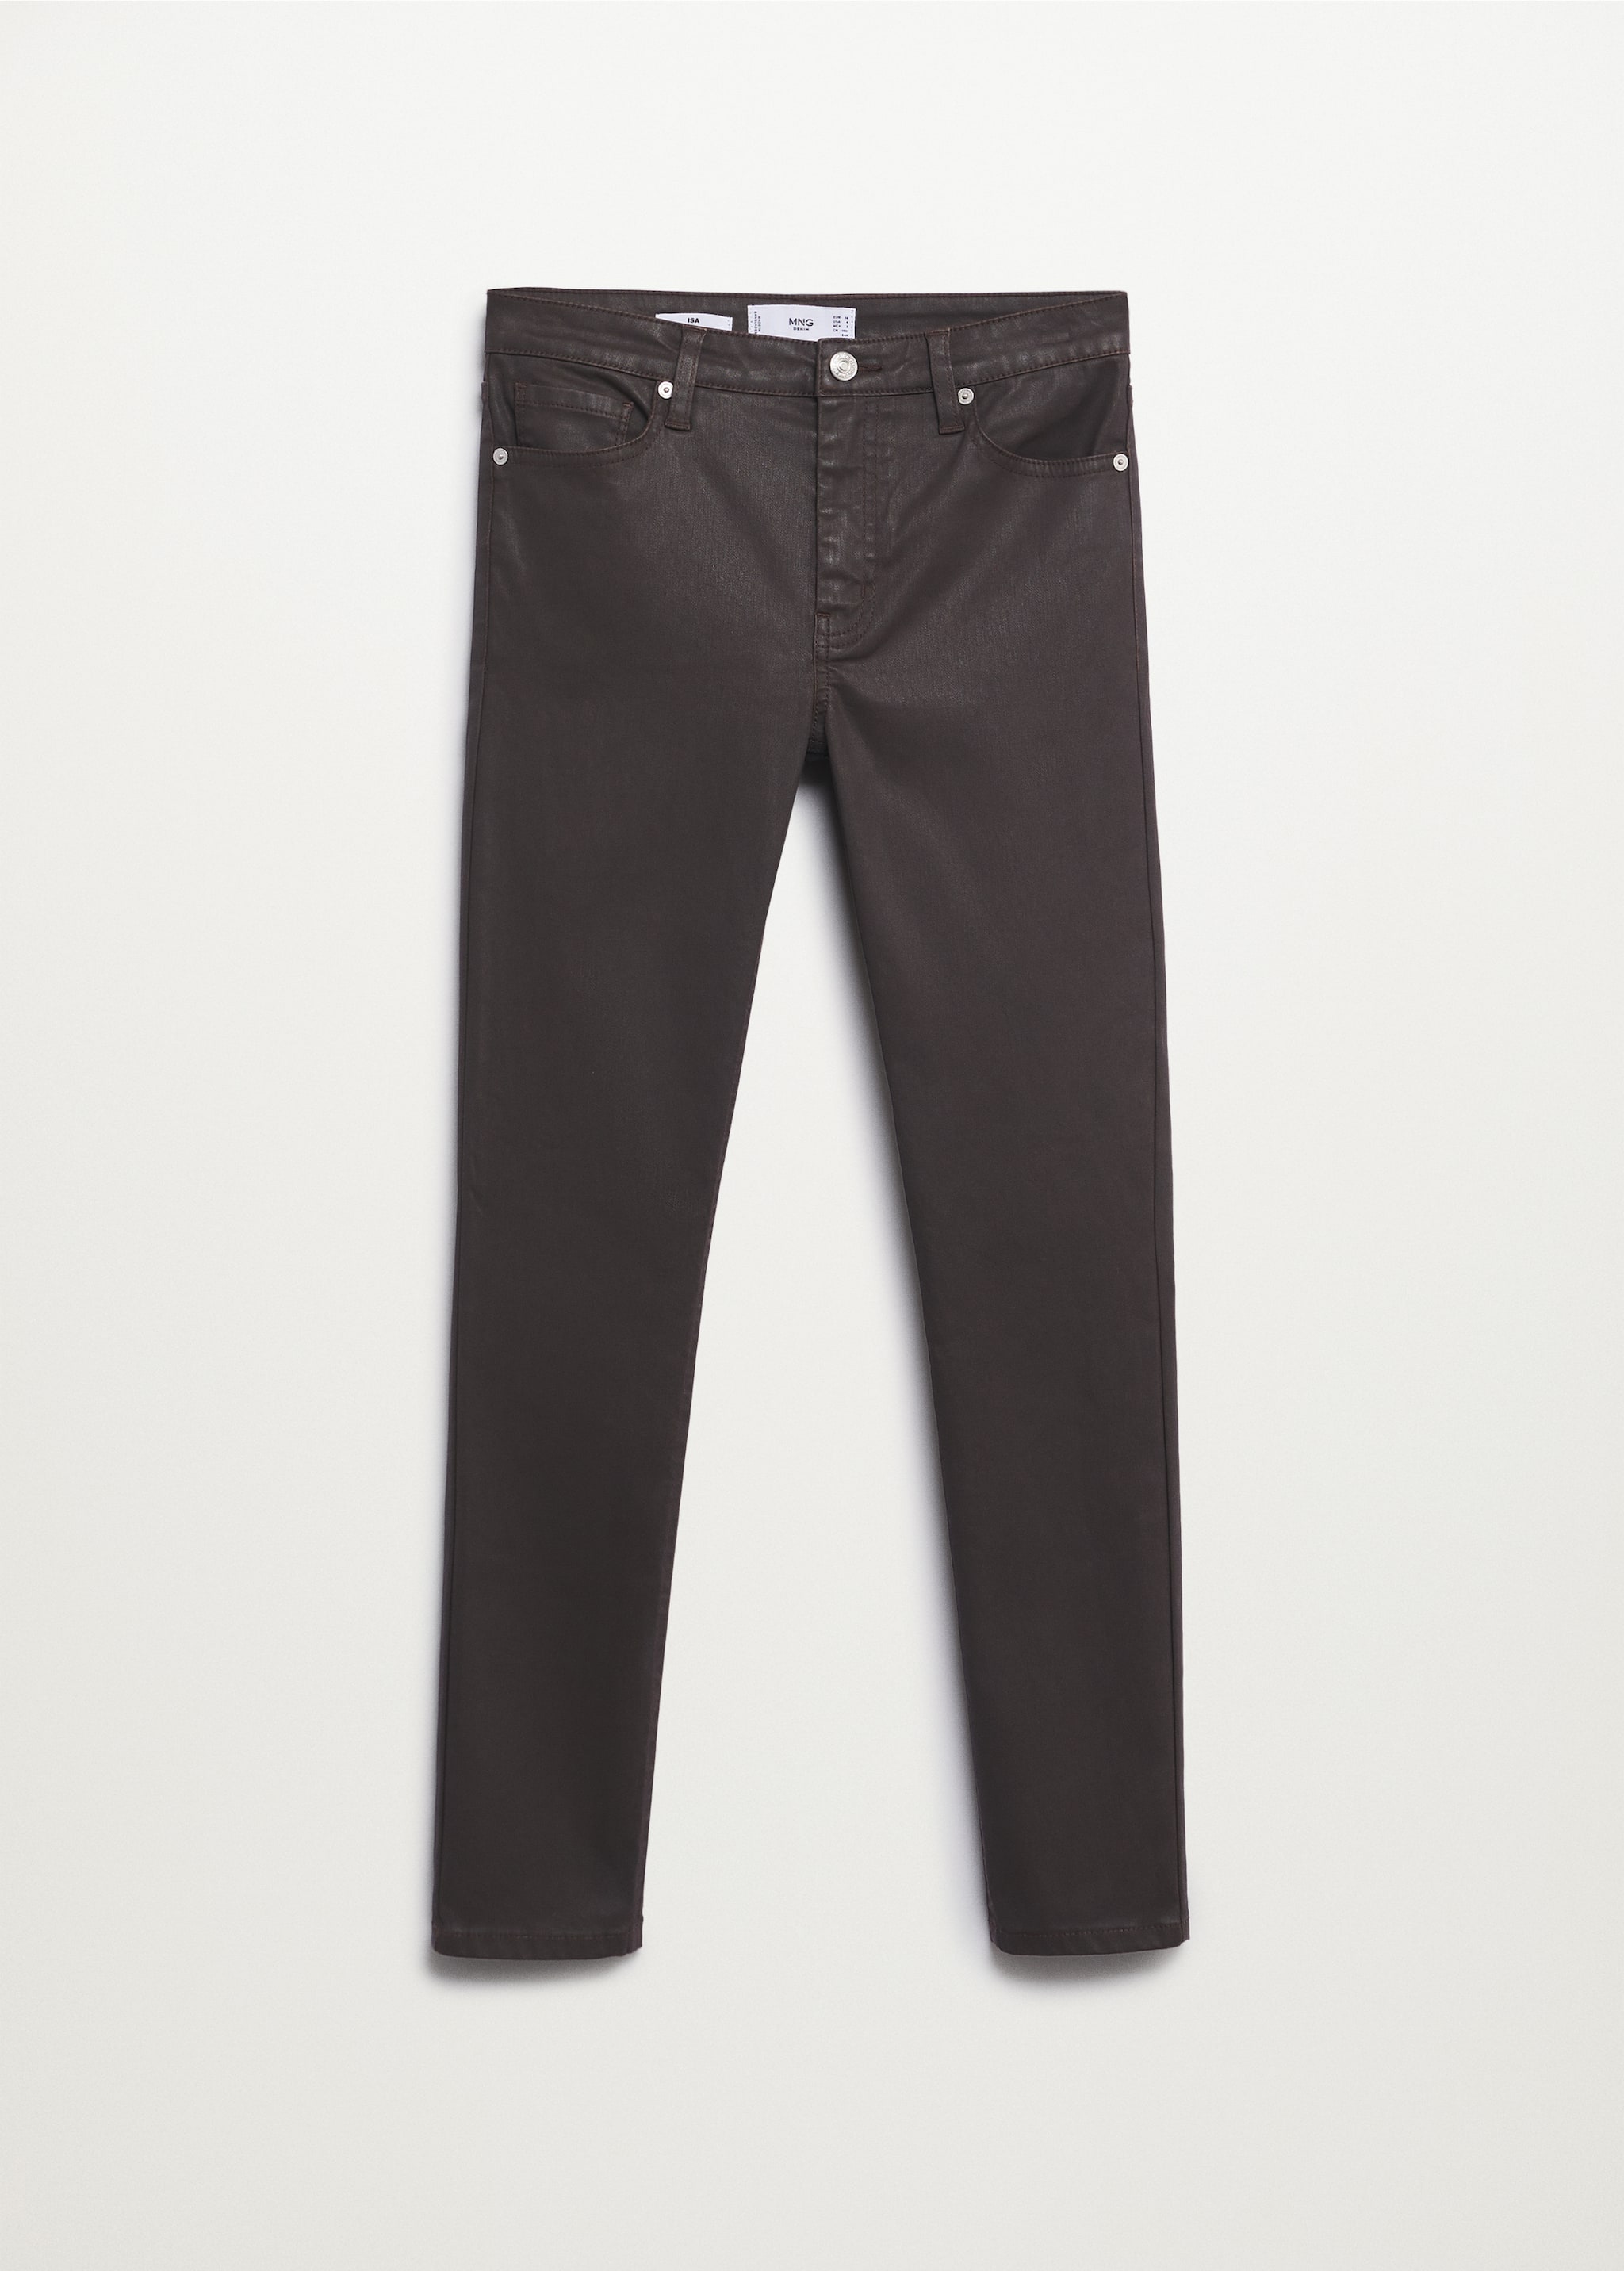 Isa waxed skinny cropped jeans - Article without model